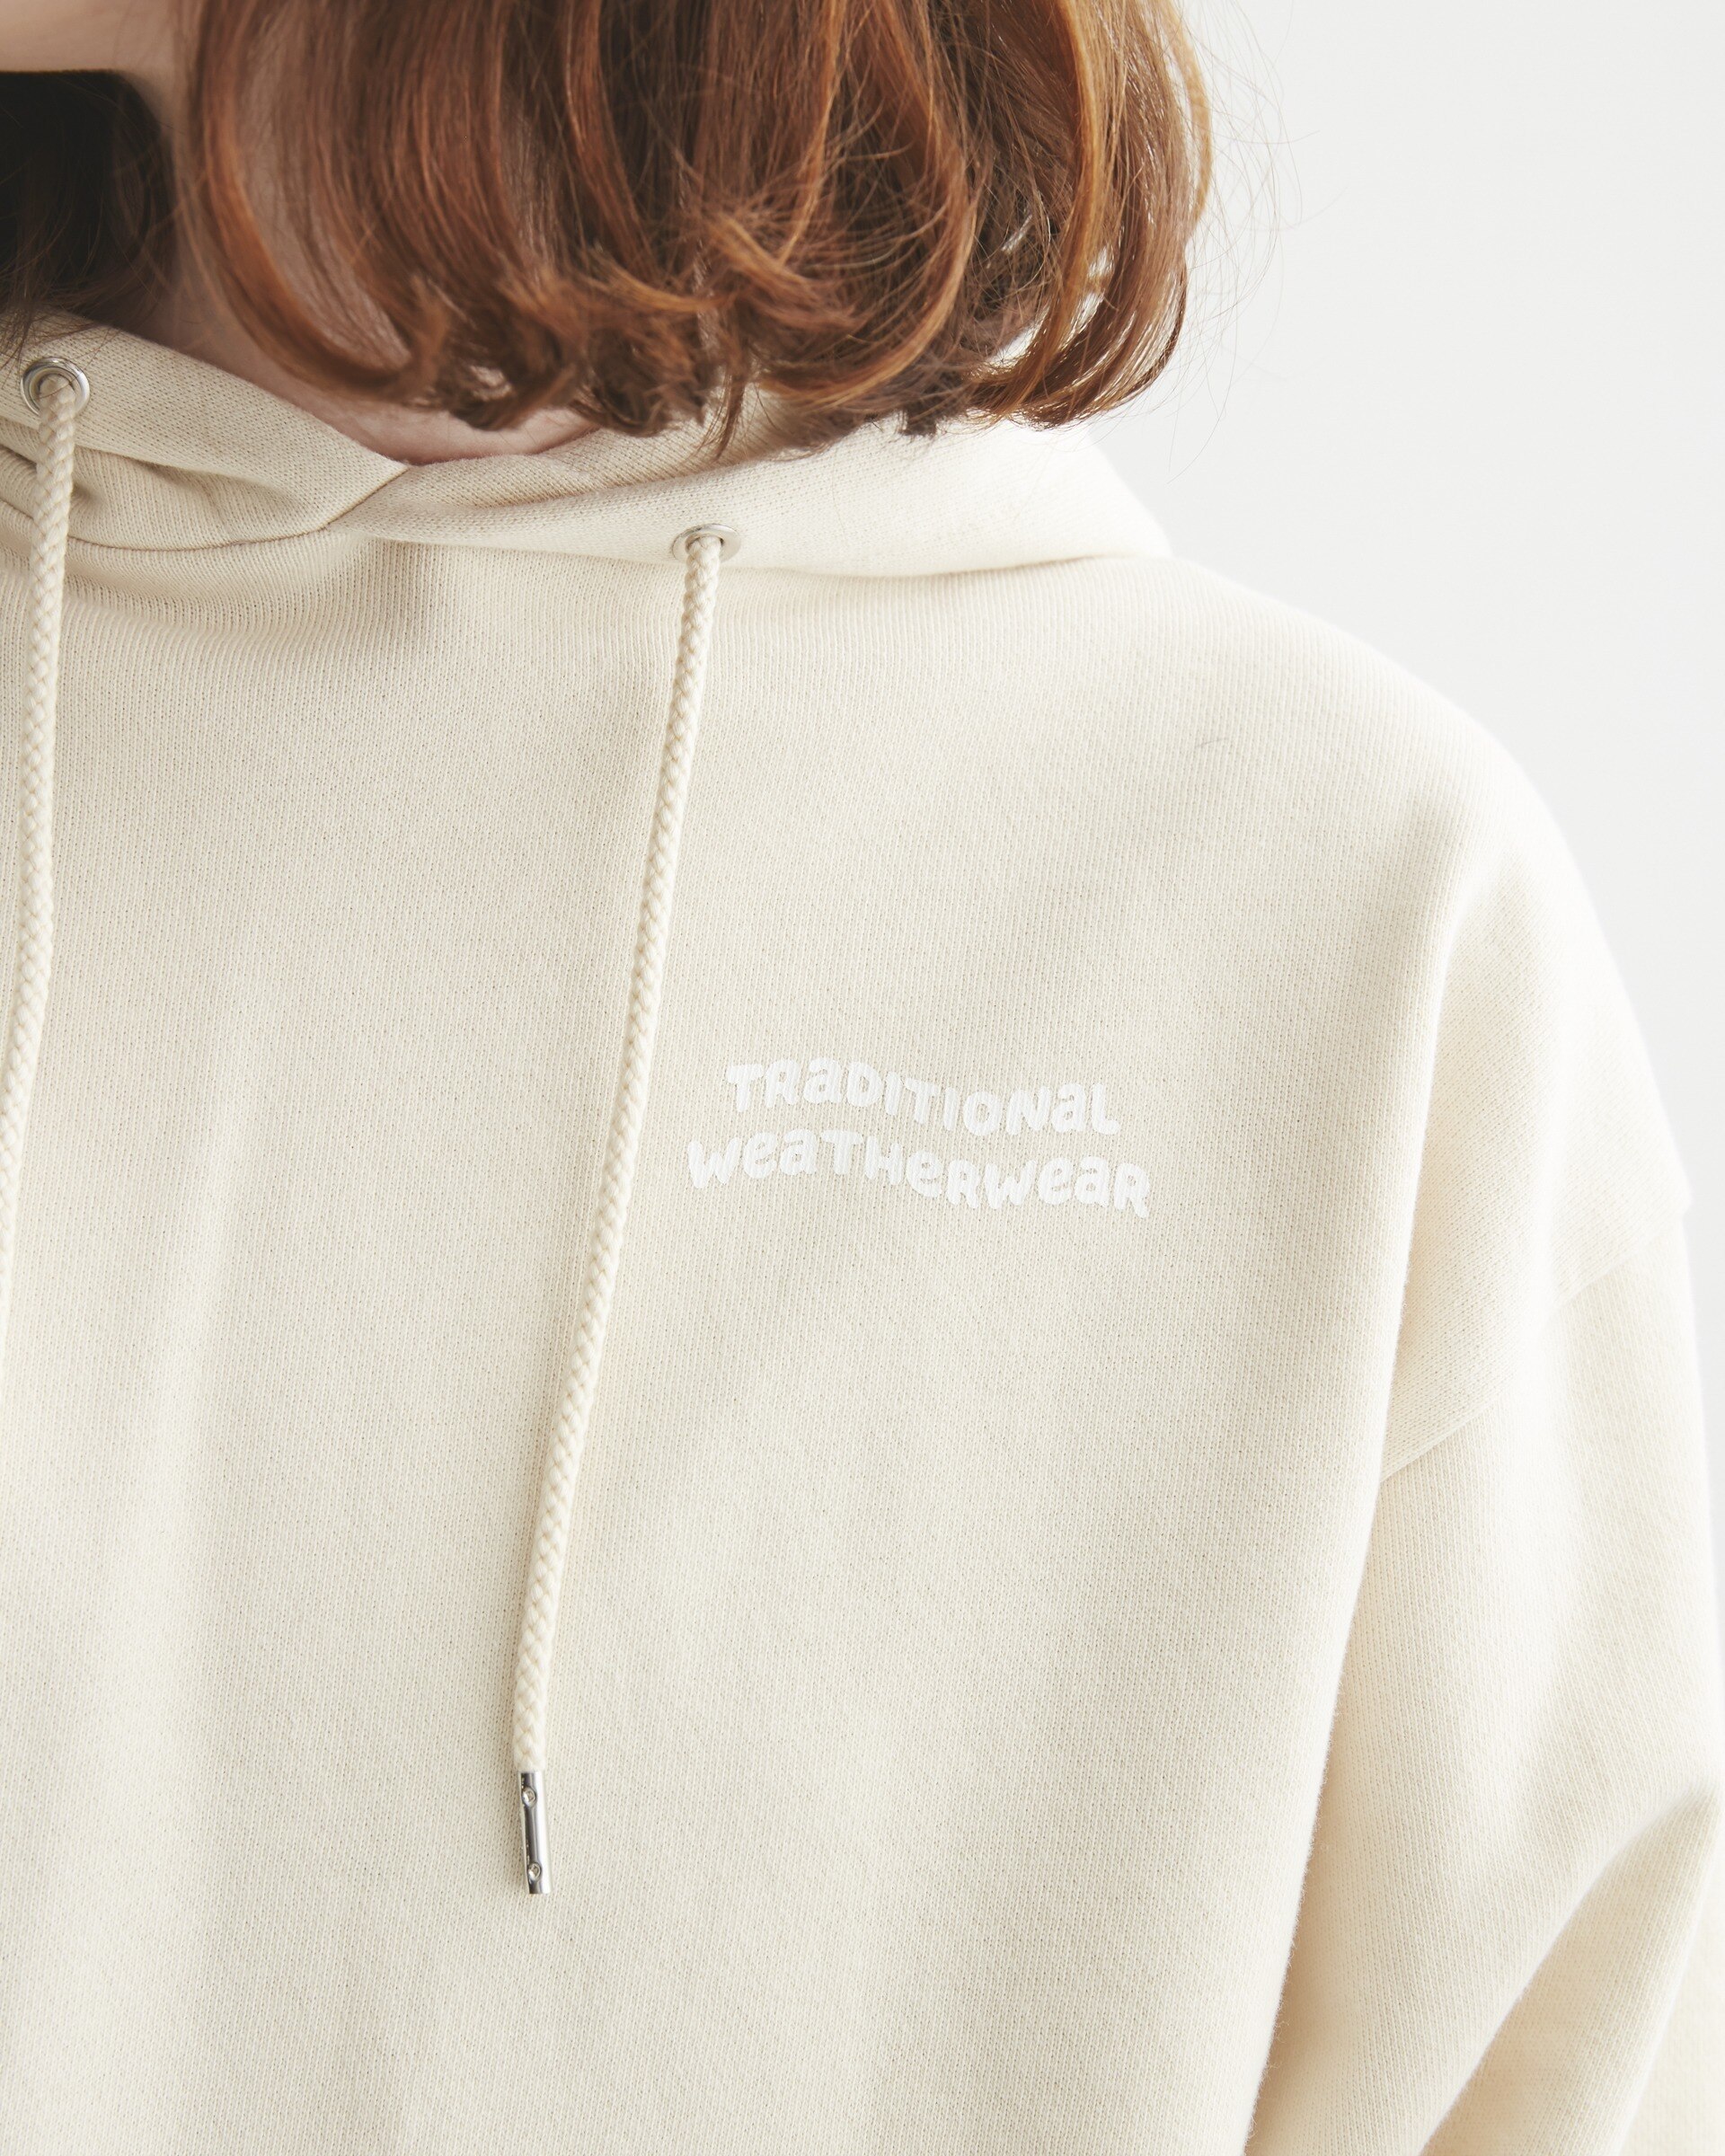 WAVE LOGO PULL OVER SWEAT PARKA|Traditional Weatherwear